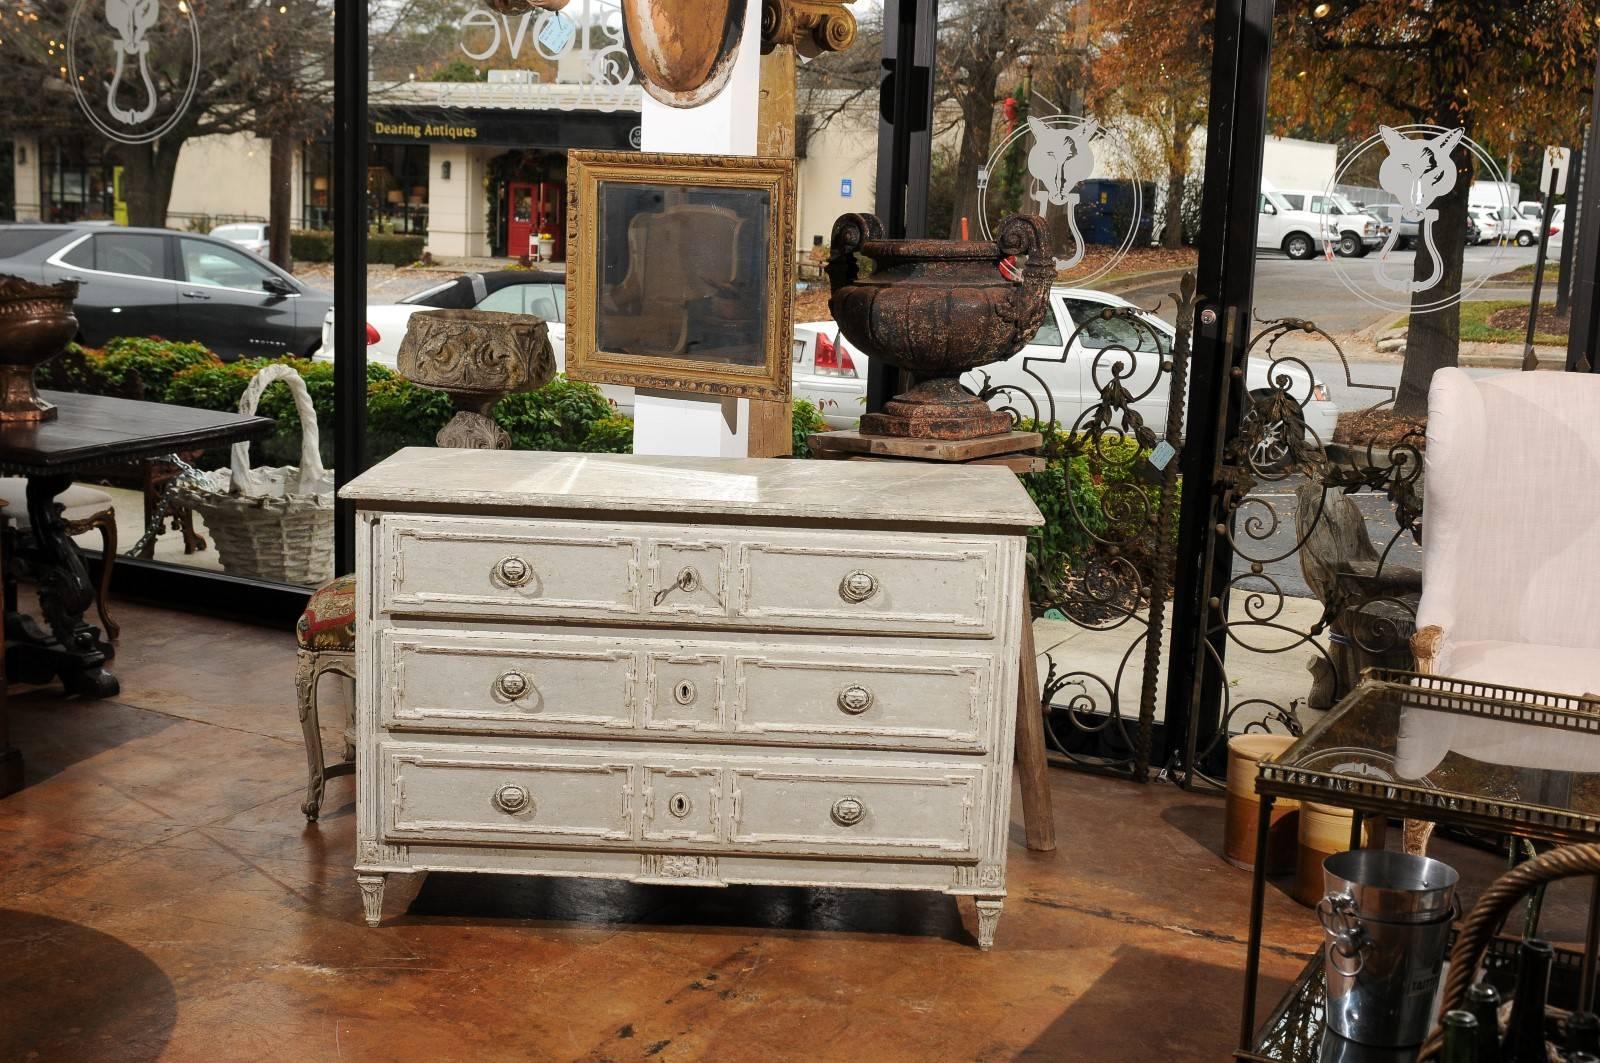 A French light grey painted pine three-drawer commode with marbleized top from the early 20th century. This French painted chest features a rectangular planked faux-marble top sitting above three long drawers. The painted hardware is beautifully